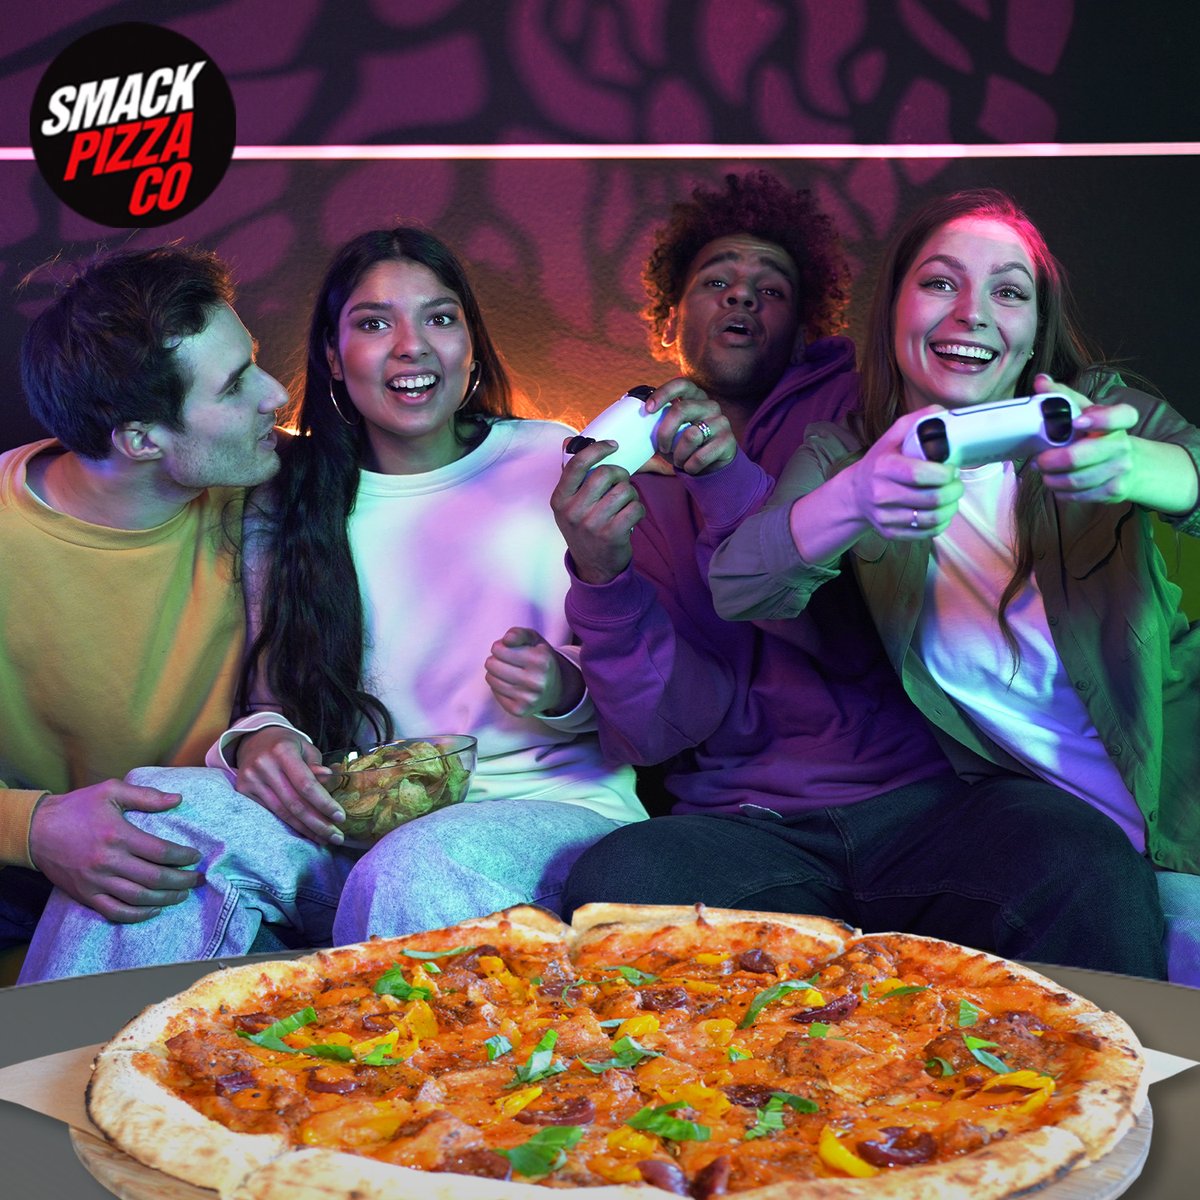 Kickstart the weekend with good company and even better pizza! 😍🍕

#smackmaxxing #Smack #lowingluten #highqualityingredients #pizzalover #stonemilledflour #AuthenticNewYork #Bestcrust #Secretisinthecrust